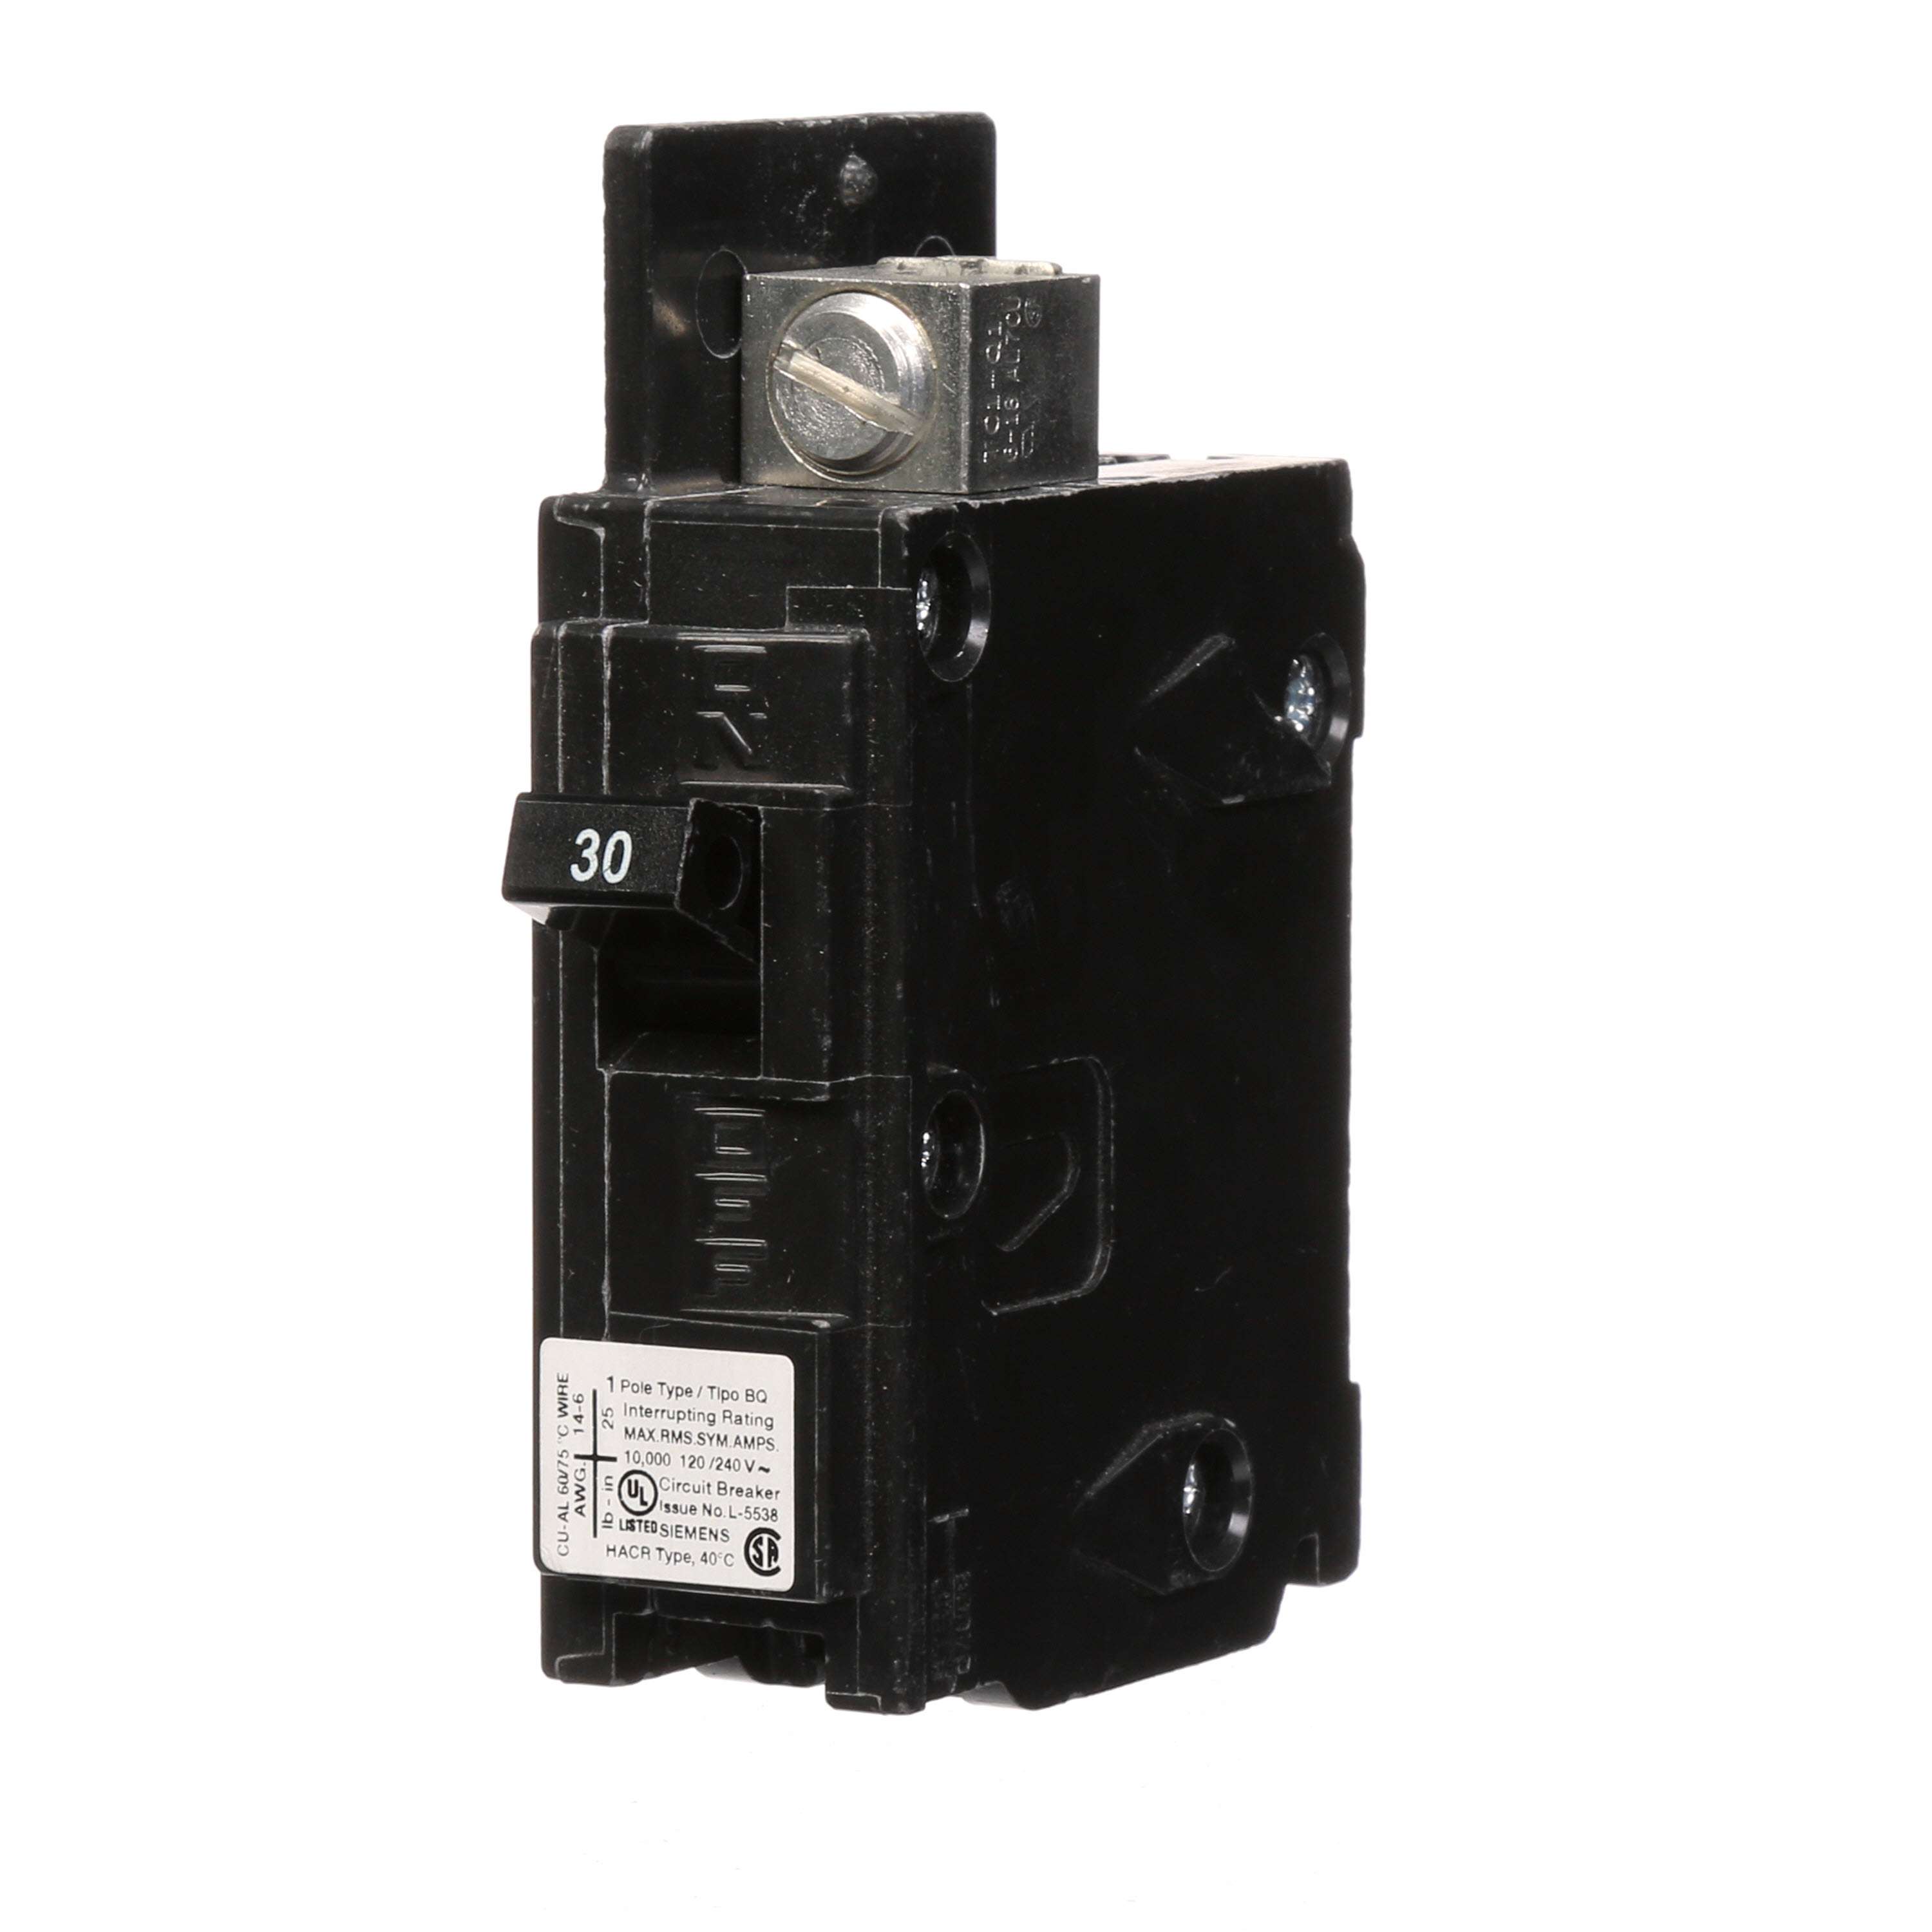 Siemens Low Voltage Molded Case Circuit Breakers General Purpose MCCBs are Circuit Protection Molded Case Circuit Breakers. 1-Pole circuit breaker type BQ. Rated 120V (030A) (AIR 10 kA). Special features line side lugs included. Note Load side lugs are included.